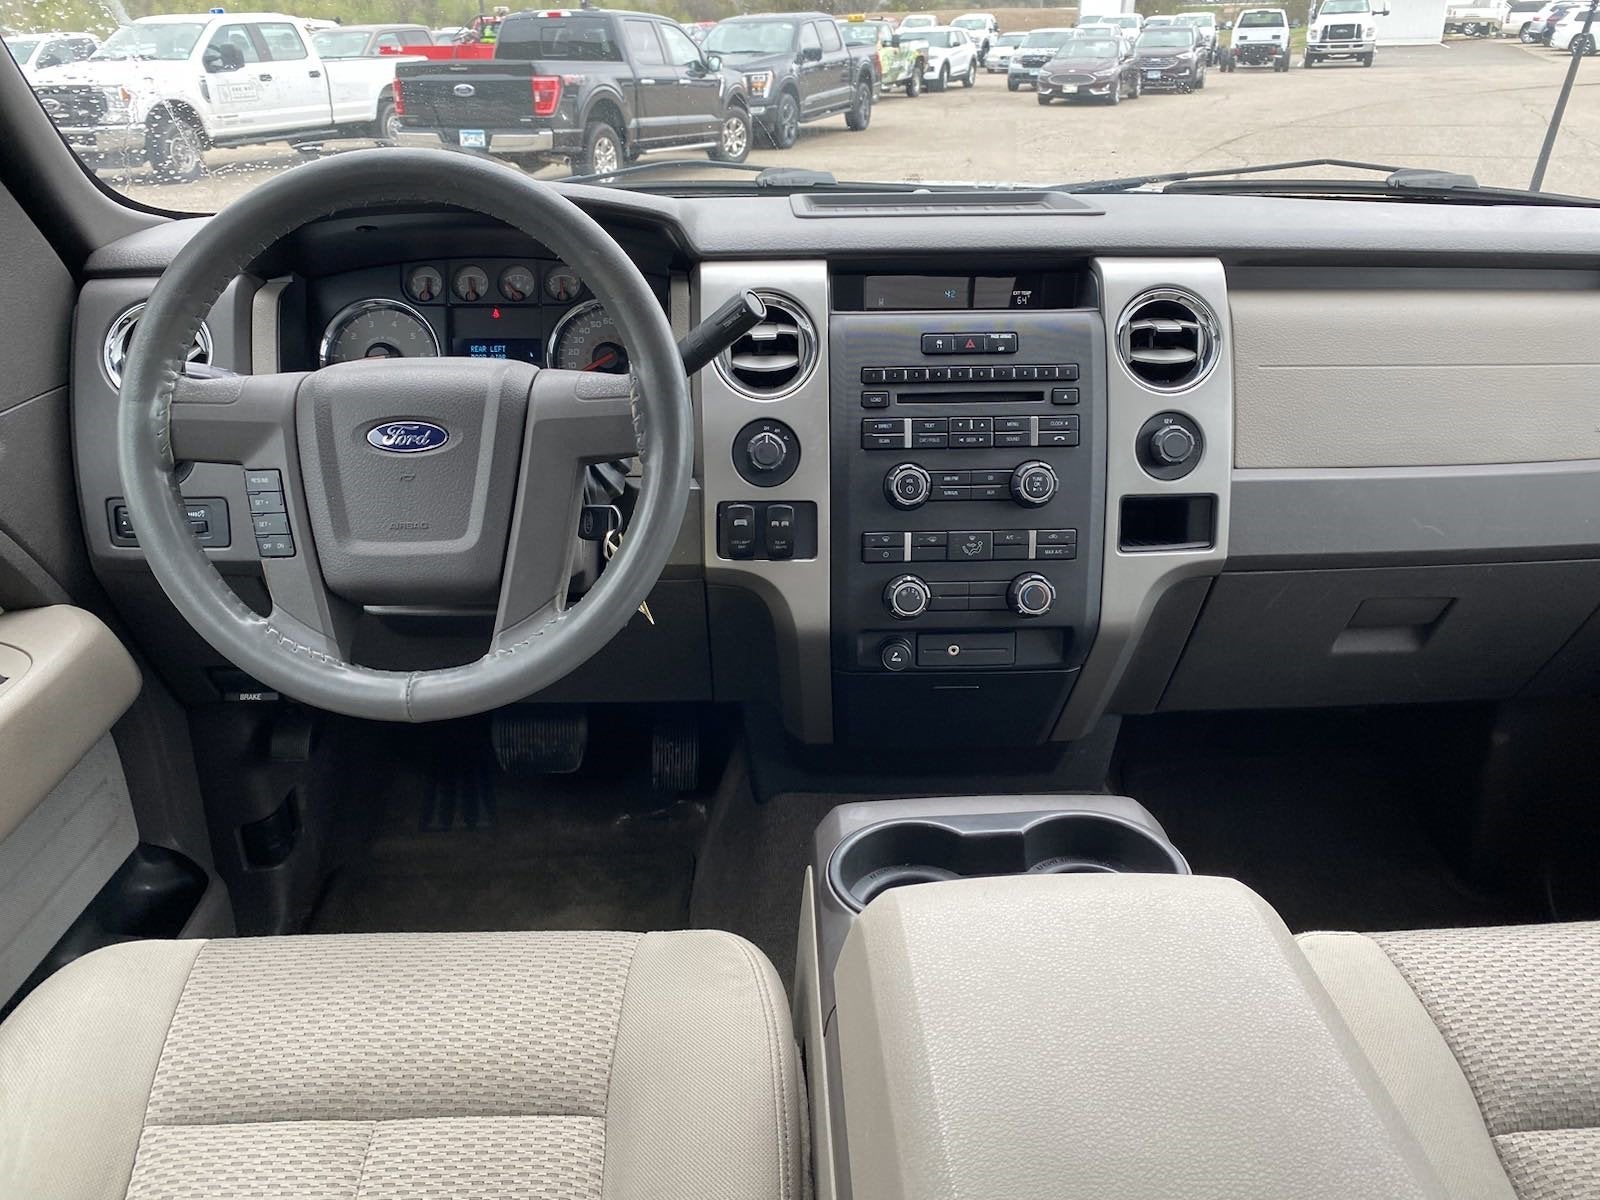 Used 2009 Ford F-150 XLT with VIN 1FTPW14V39FA35229 for sale in Jordan, Minnesota